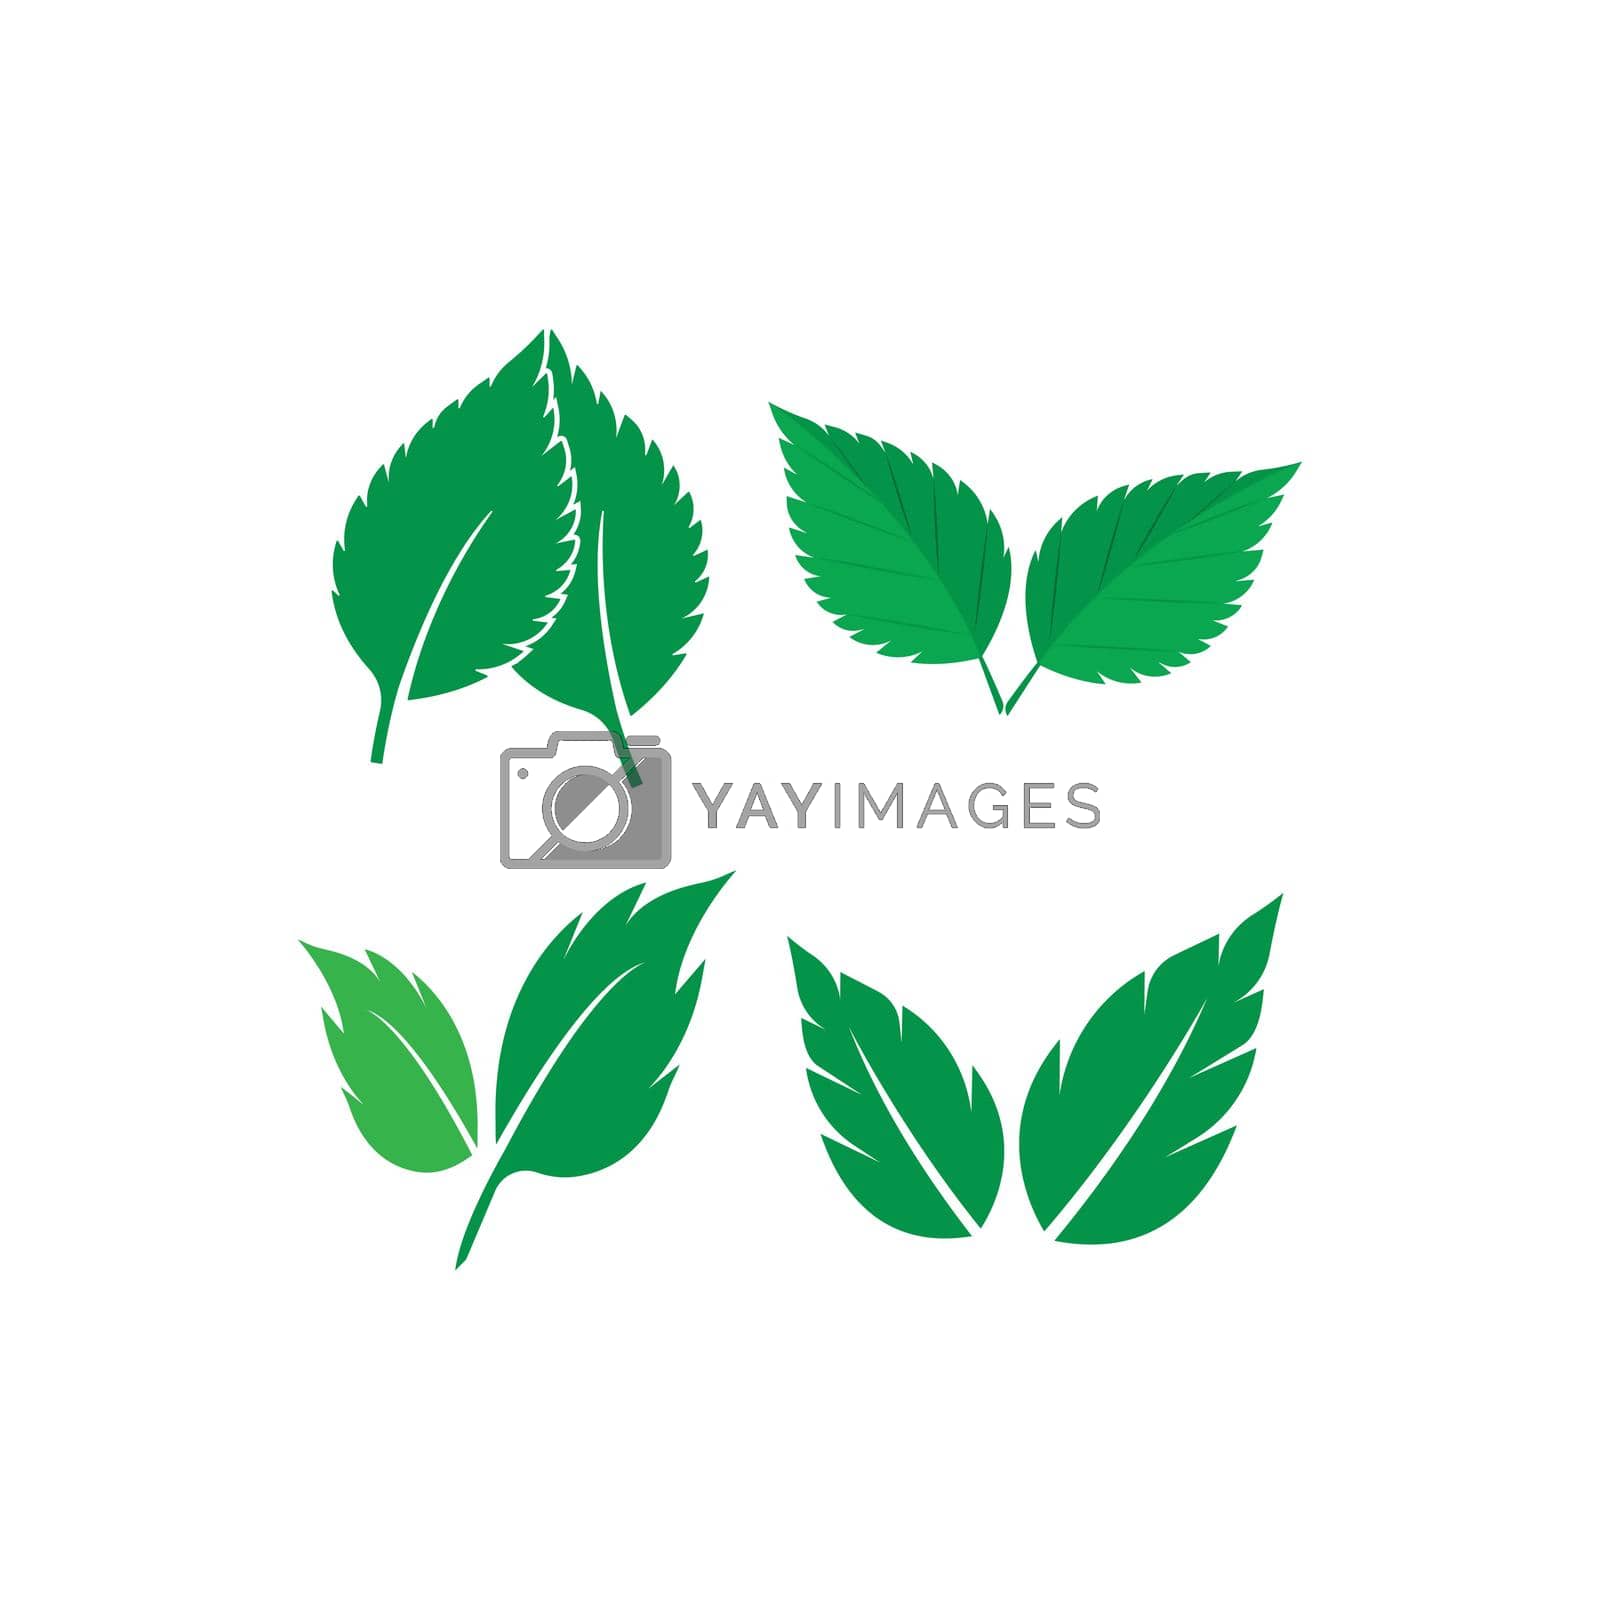 Royalty free image of mint leaf logo by awk